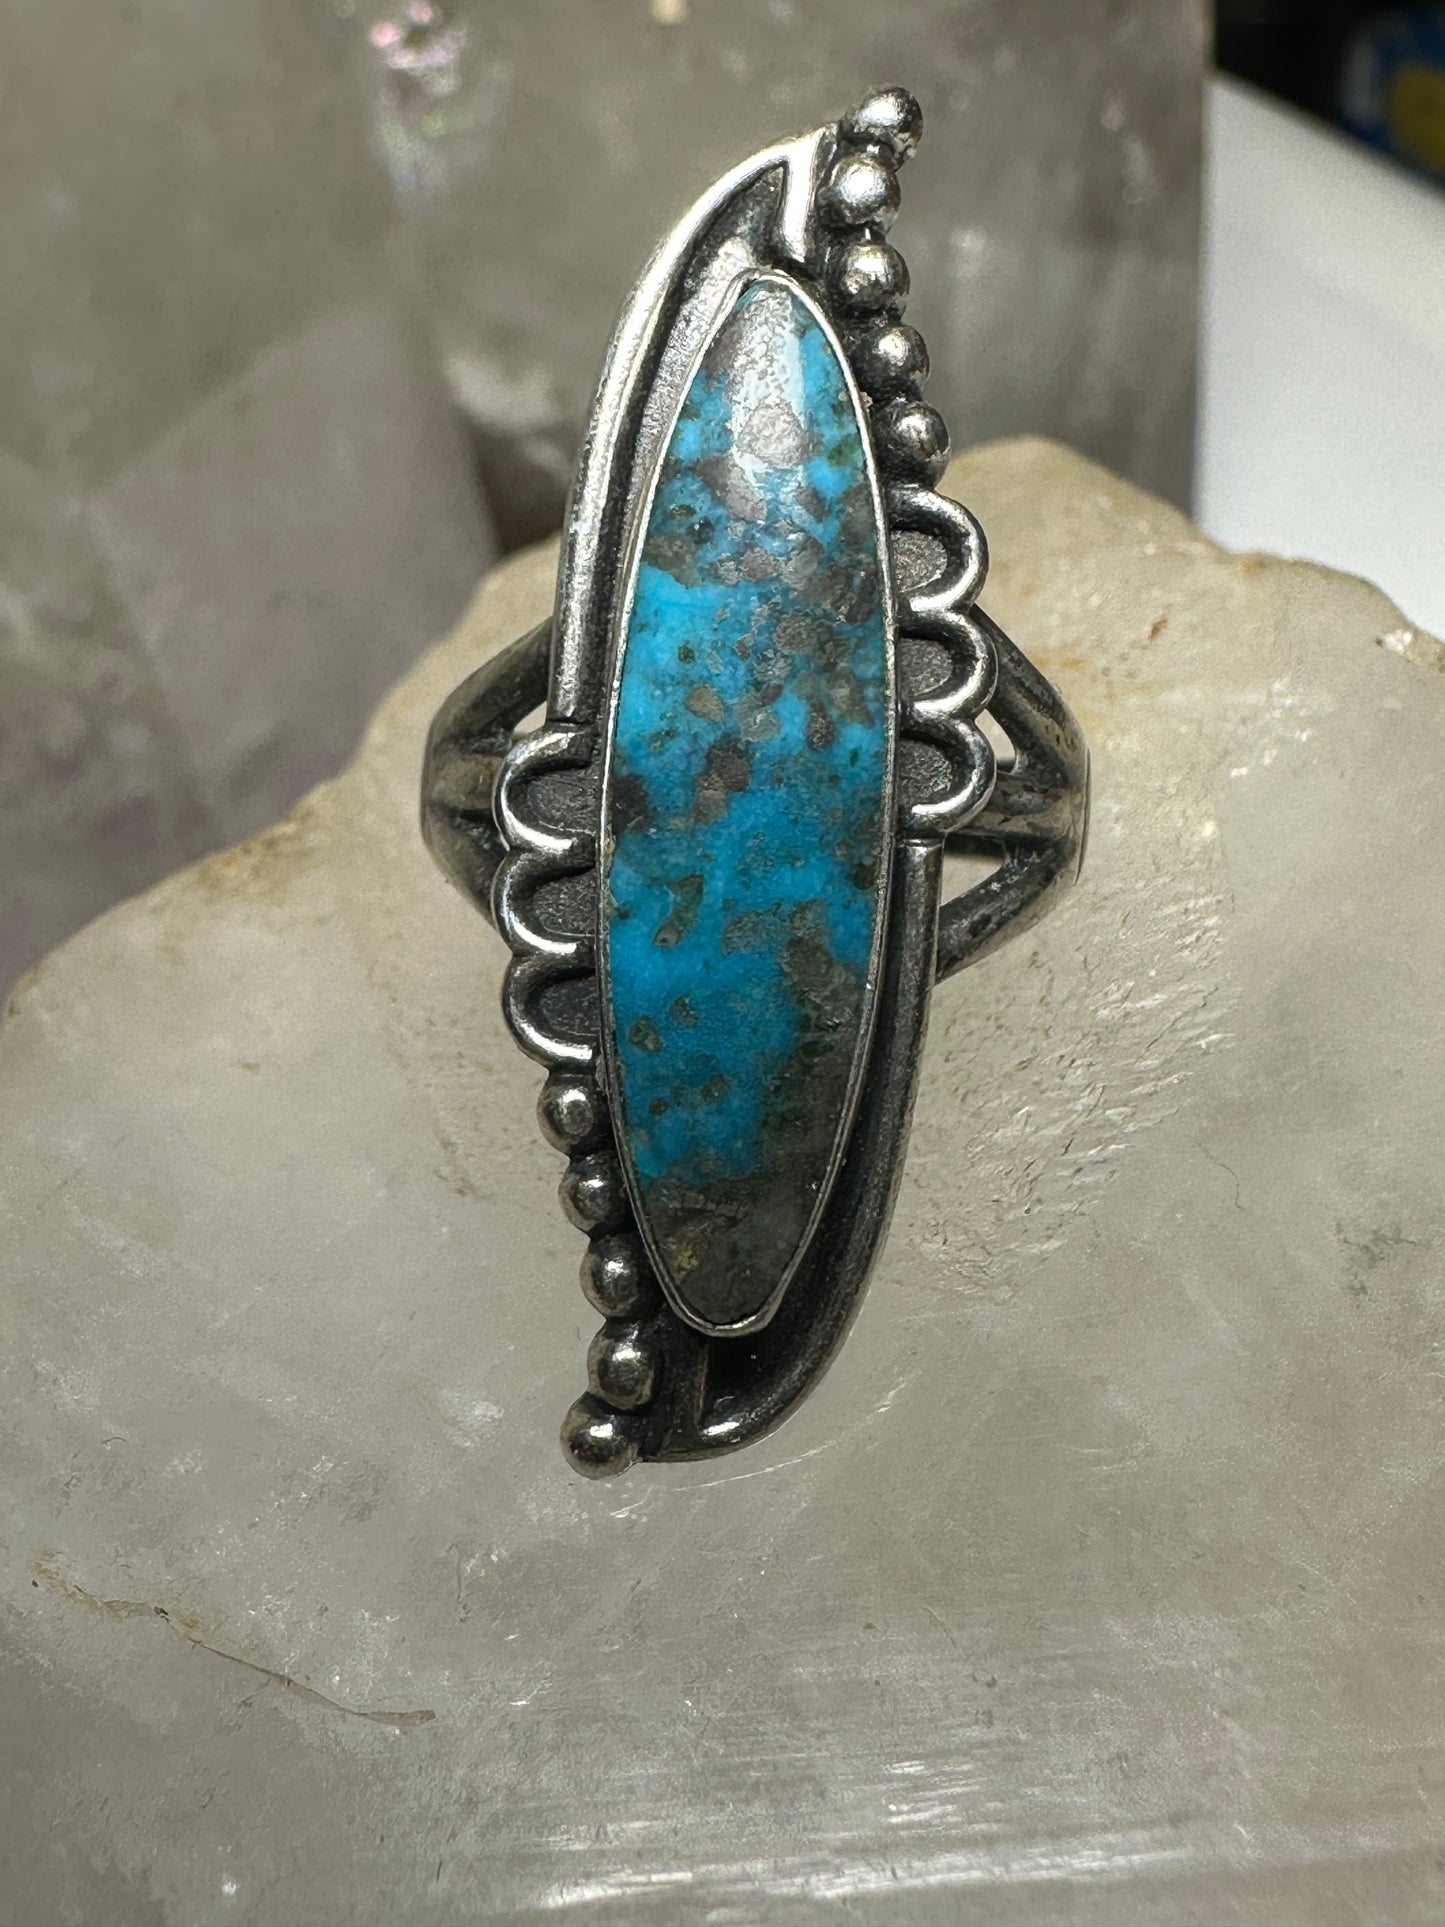 Navajo ring long turquoise size 6.75 sterling silver women girls